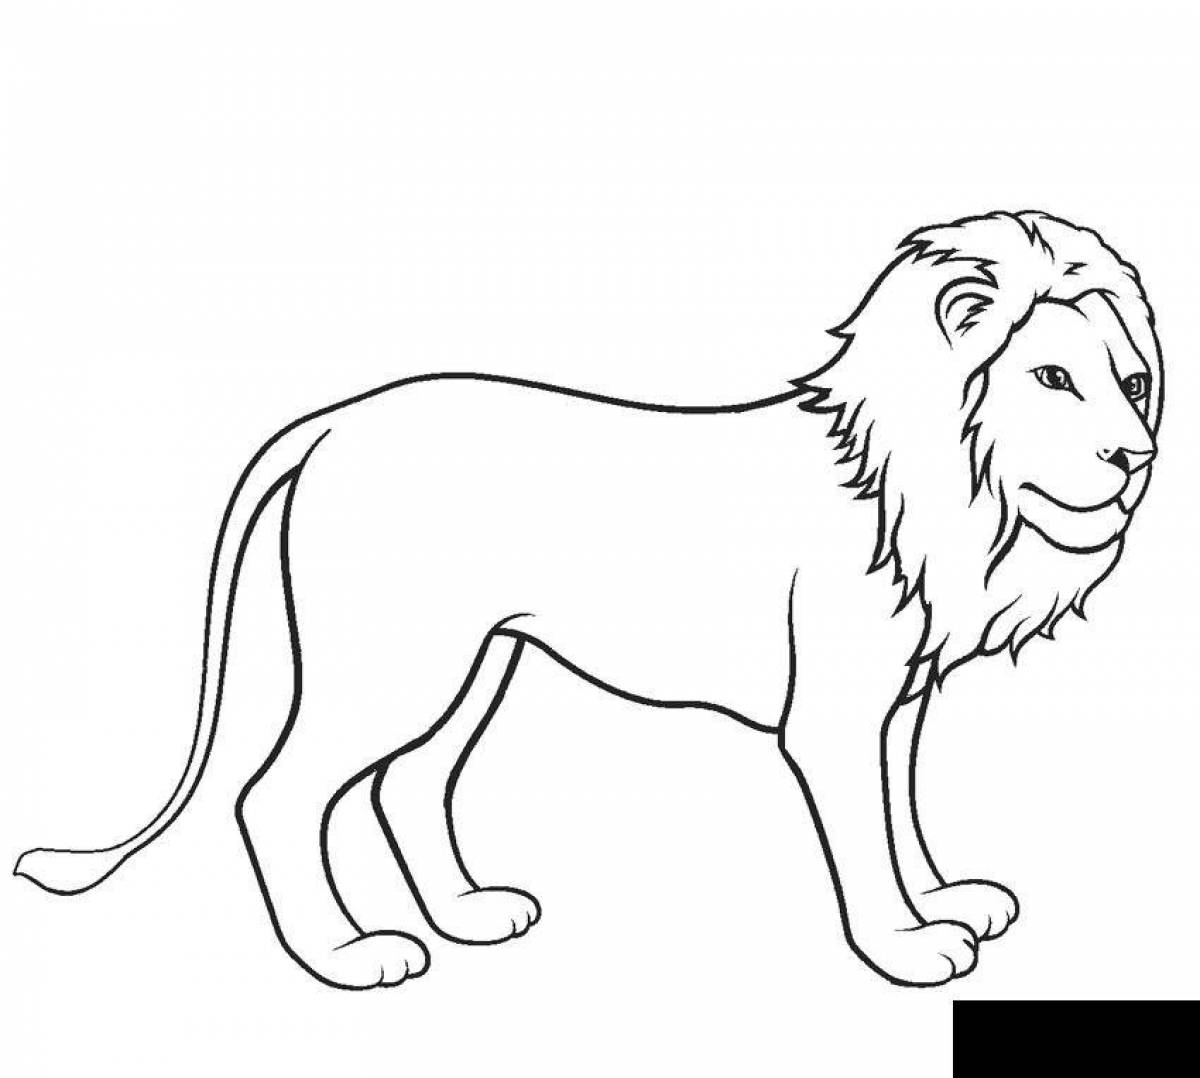 Coloring book shining lion for kids